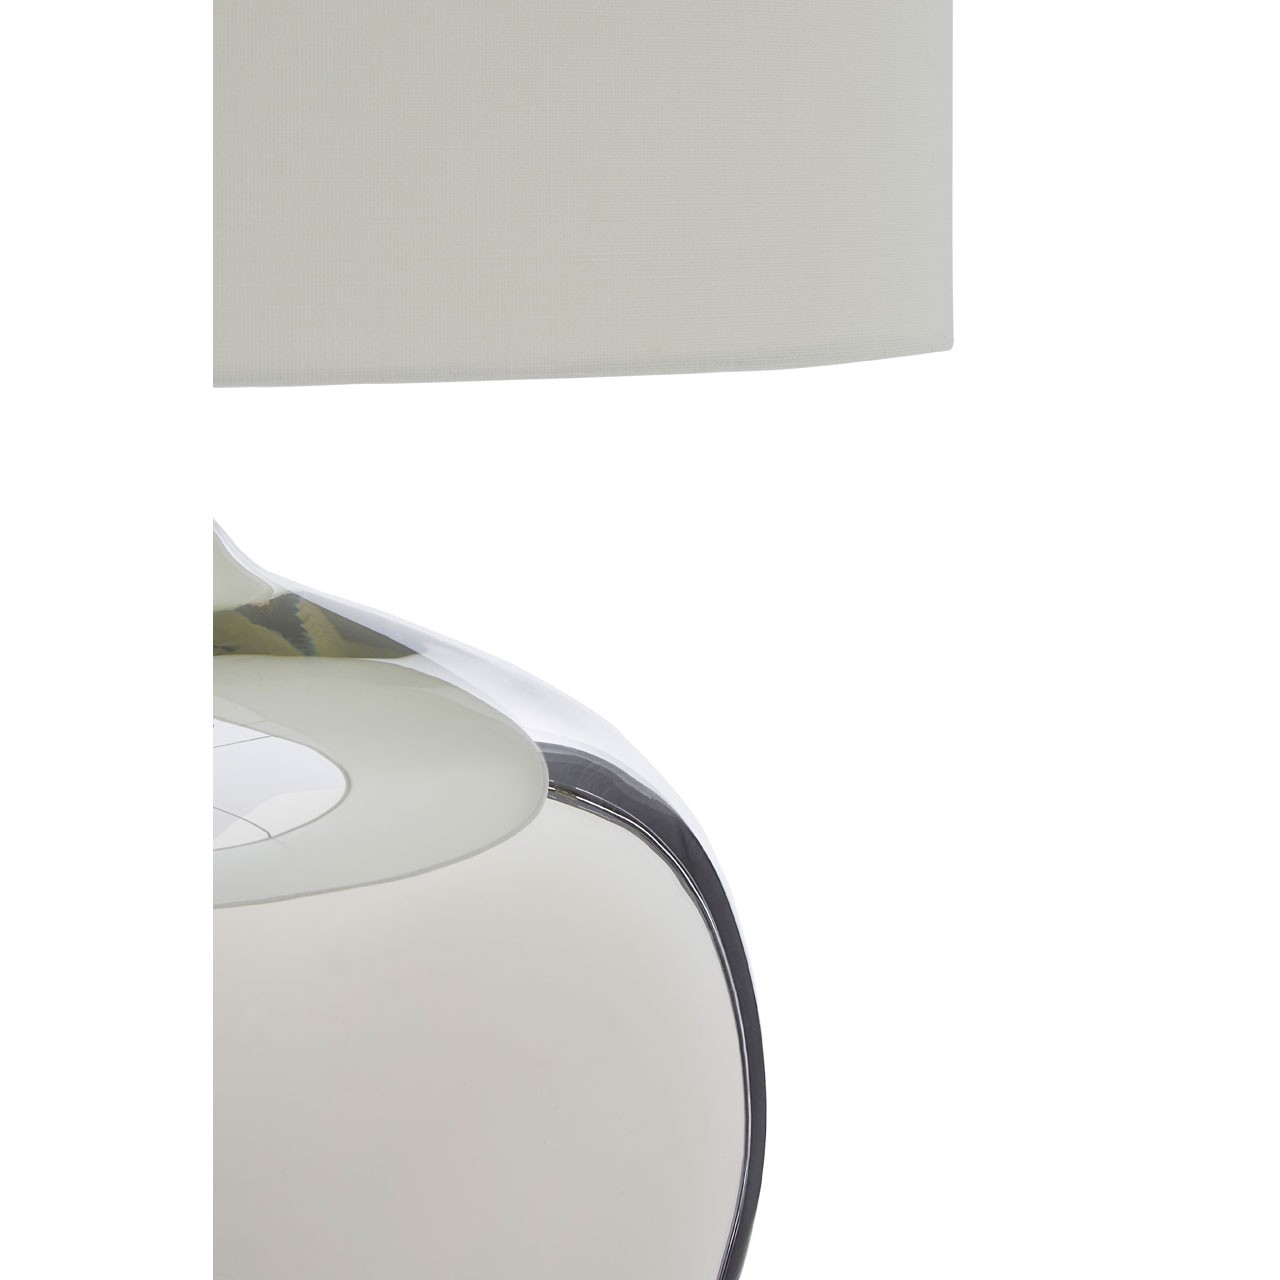 Carson Table Lamp Aiething, Carson Table Lamp Next Day Delivery